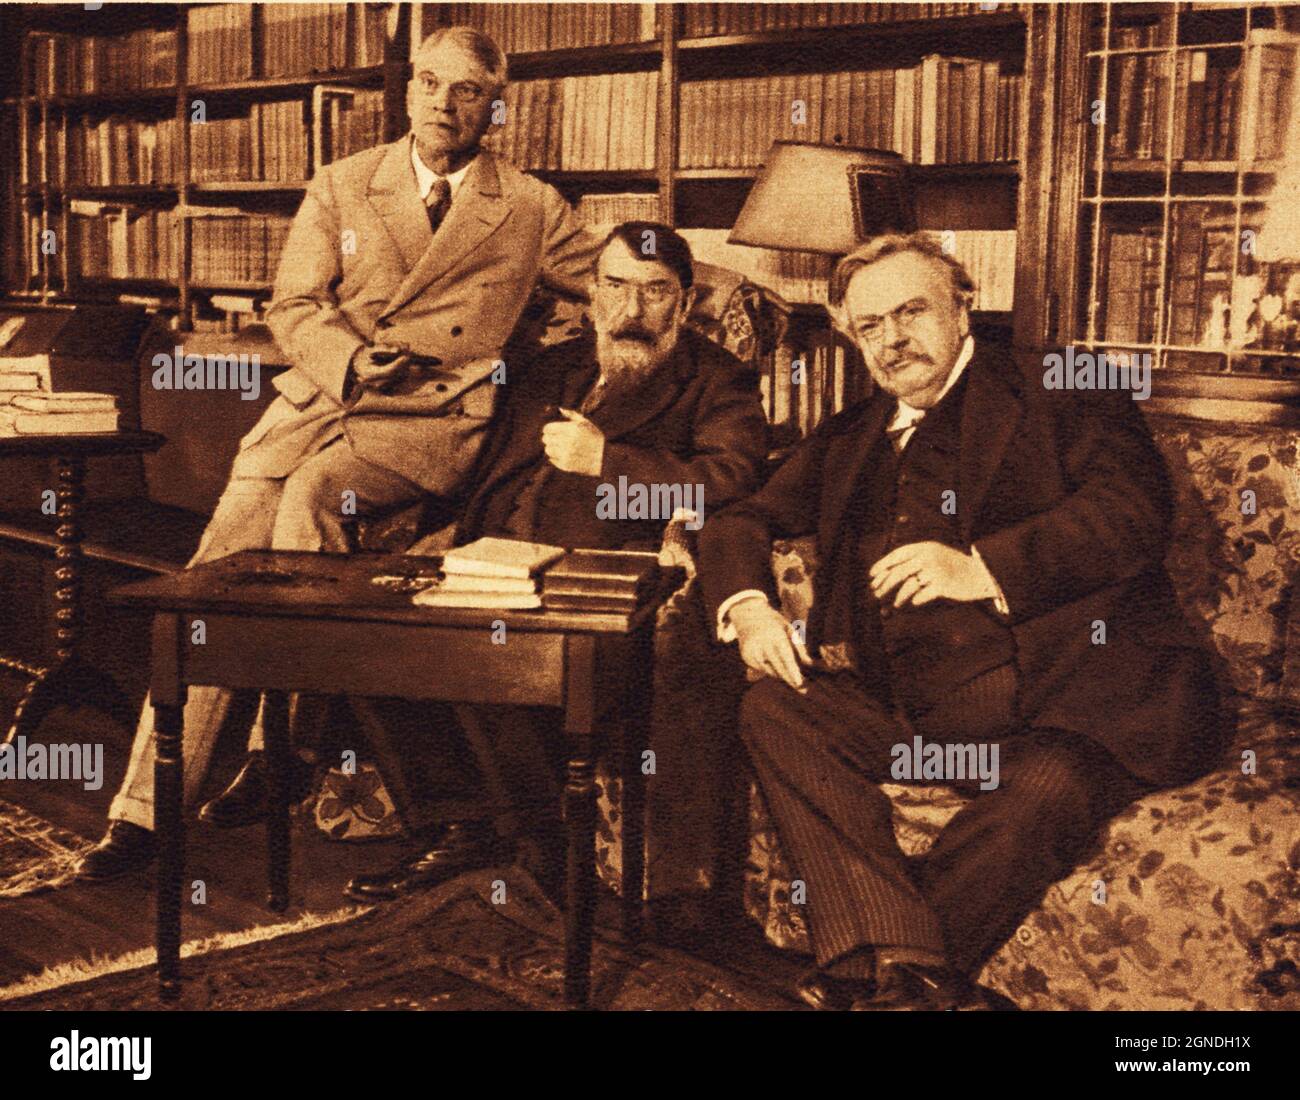 1931, Yale , USA  : The english triller  writer Gilbert Keith CHESTERTON ( 1874 - 1936 ) , at right on couch , creator of priest detective Father Brown , at Yale University  library with friends -  SCRITTORE - LETTERATURA GIALLA - LETTERATO - LITERATURE - Padre Brown   ----  Archivio GBB Stock Photo